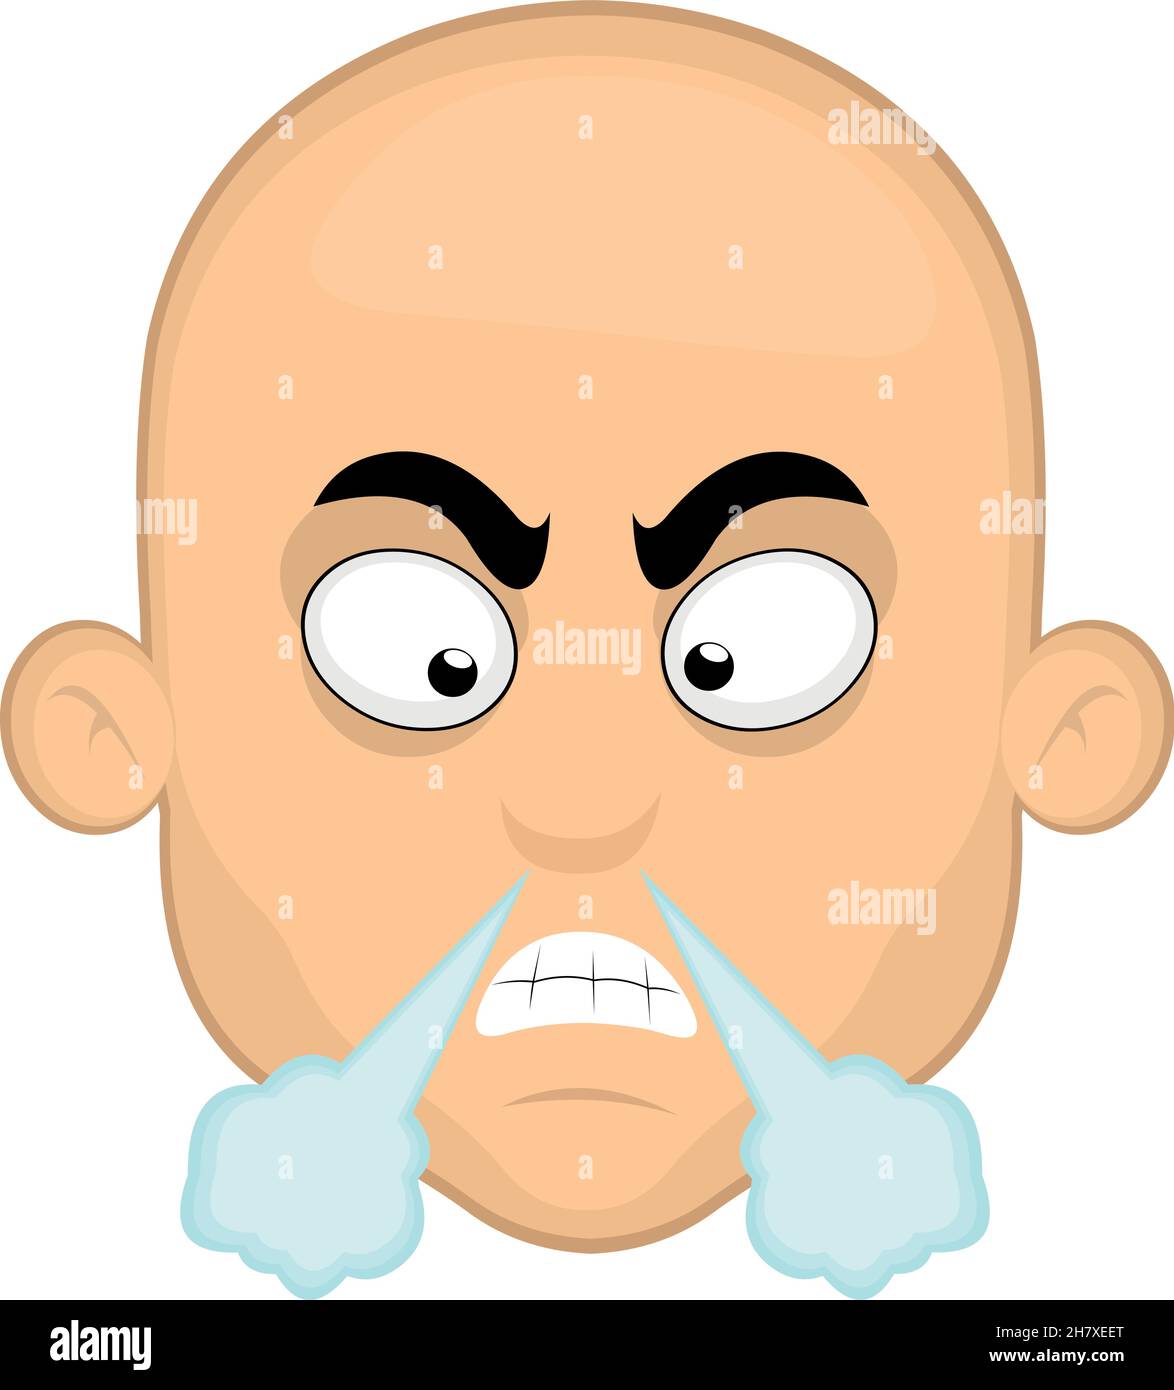 Vector emoticon illustration of a cartoon bald man's face with an angry expression and fuming from his nose Stock Vector